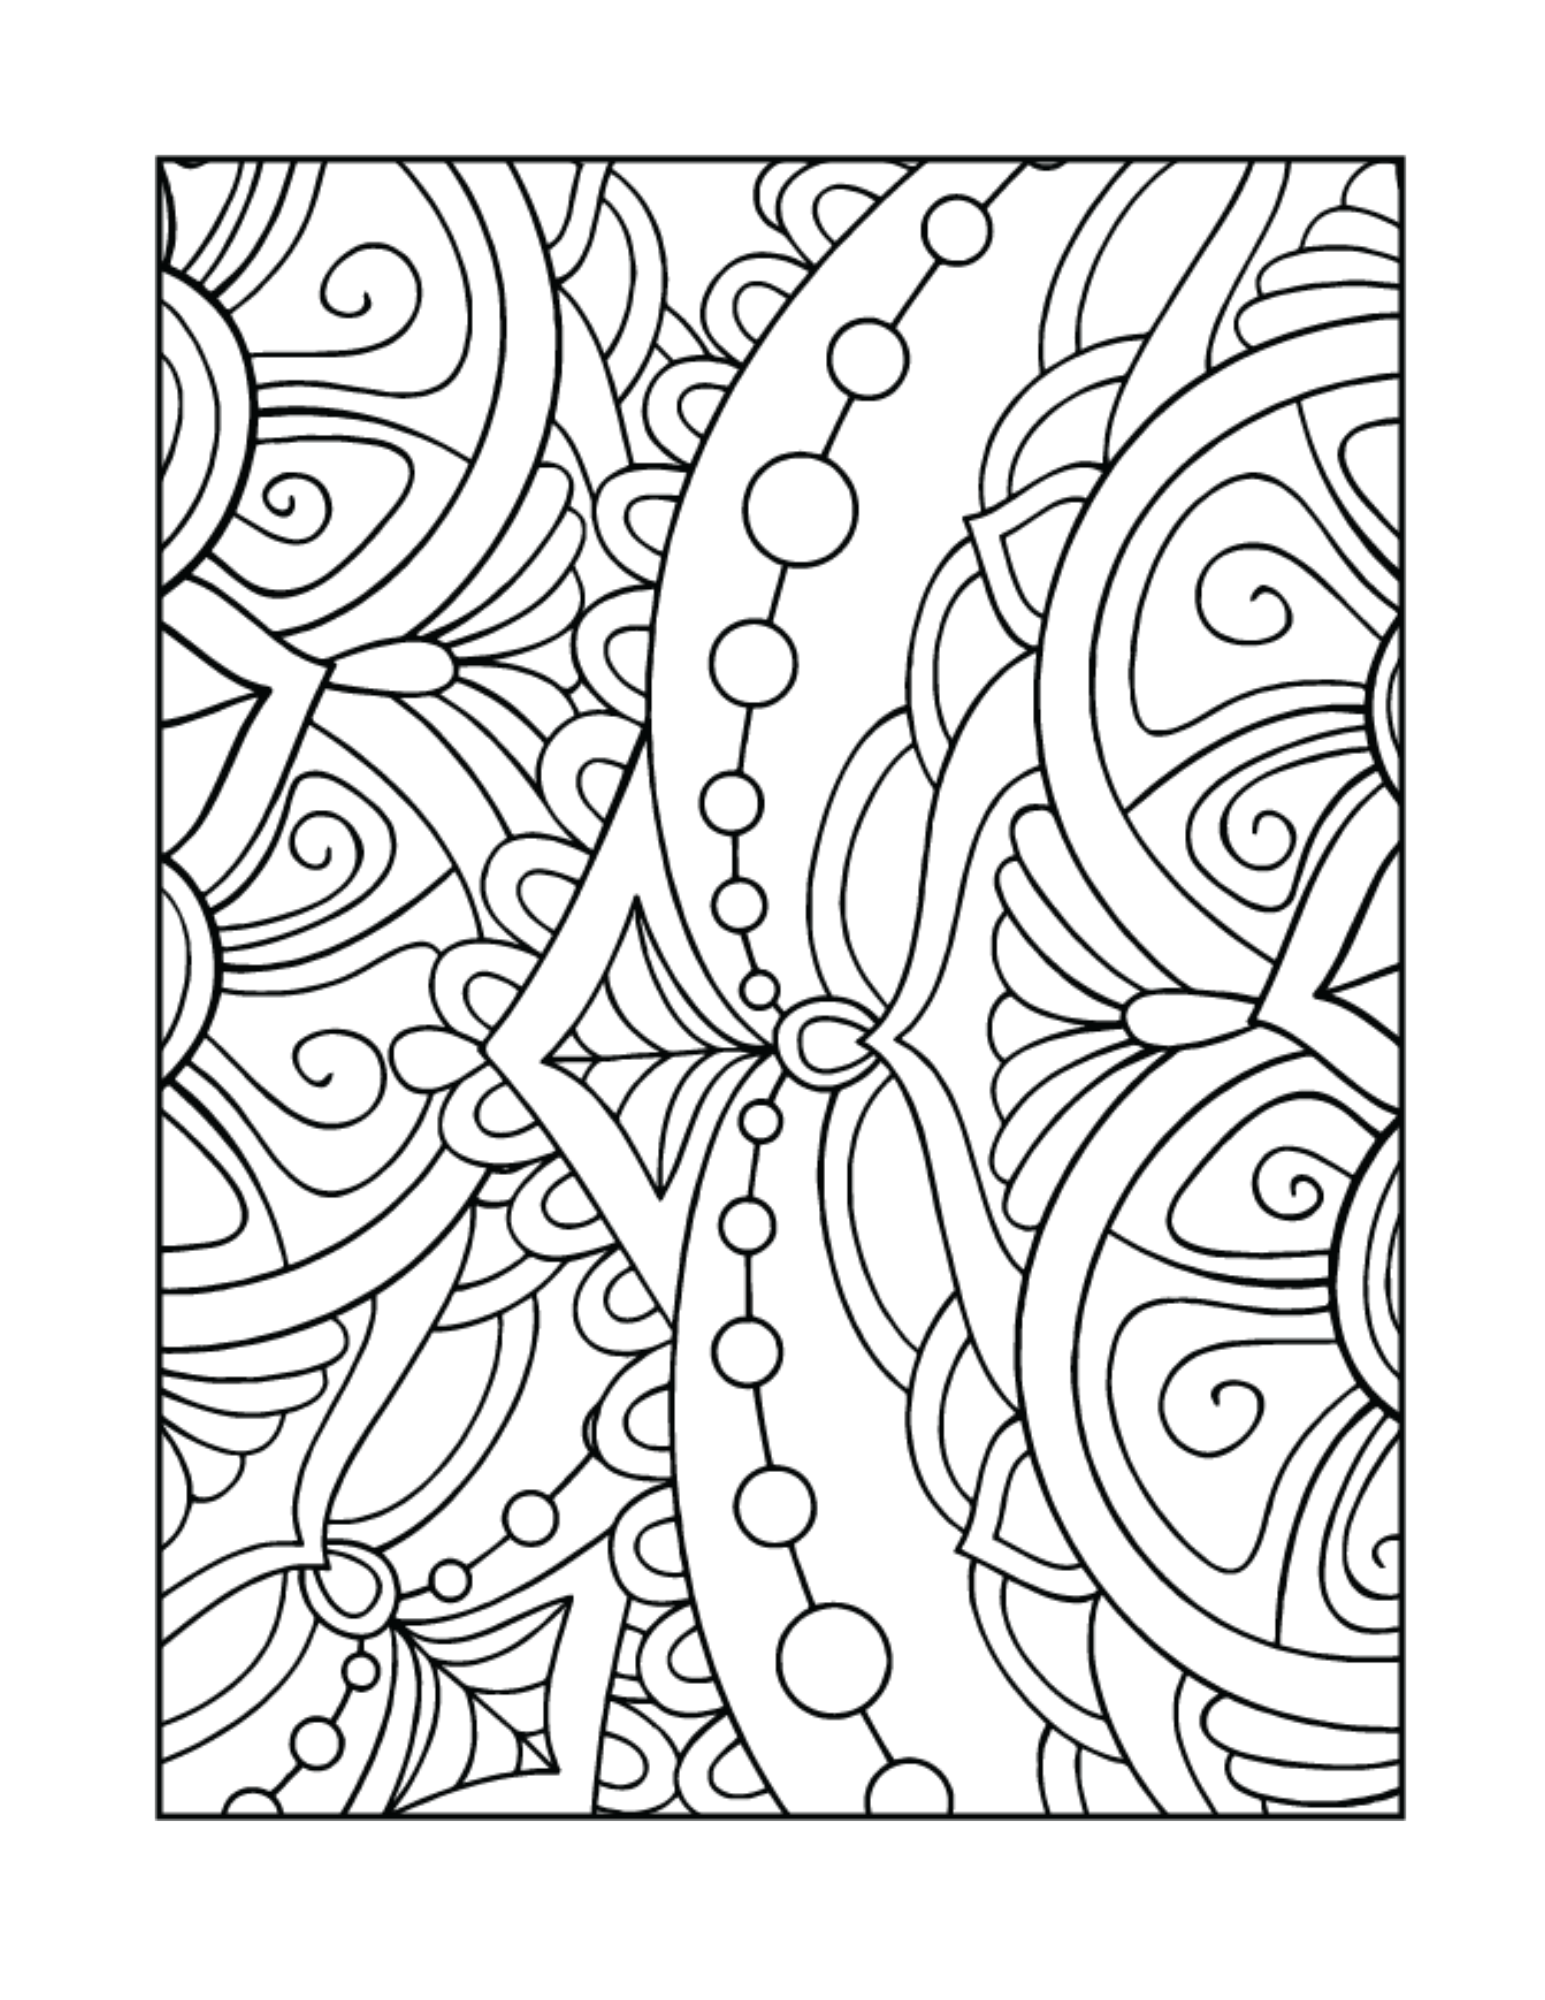 Abstract coloring books for adults: Adult Coloring Book, Stress Relieving  Patterns, Relaxing Coloring Pages, Premium 80 Hand-Drawn Abstract Designs